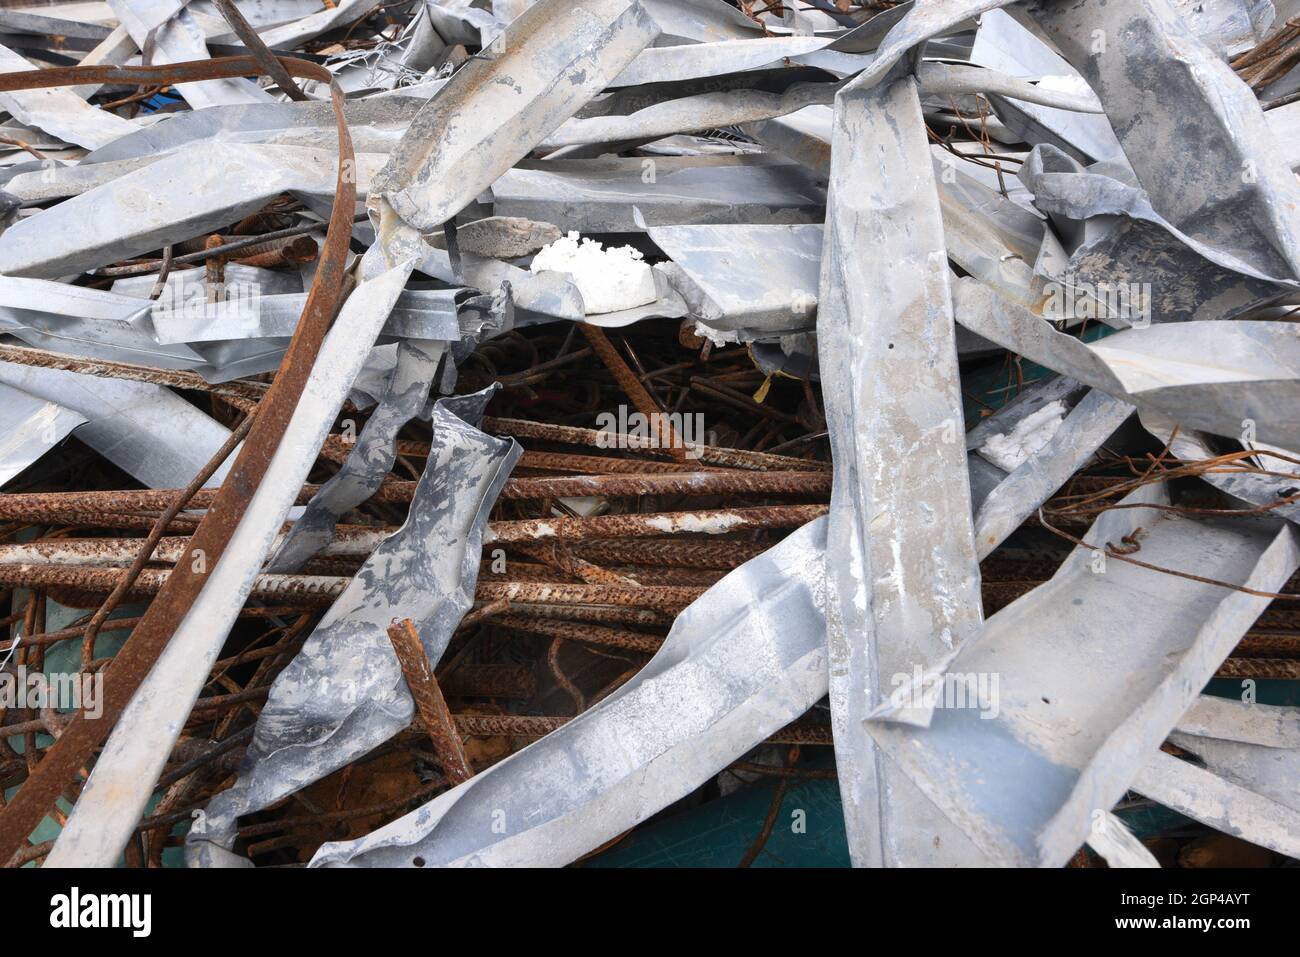 scrap iron laying on the junkyard, old and damaged materials Stock Photo